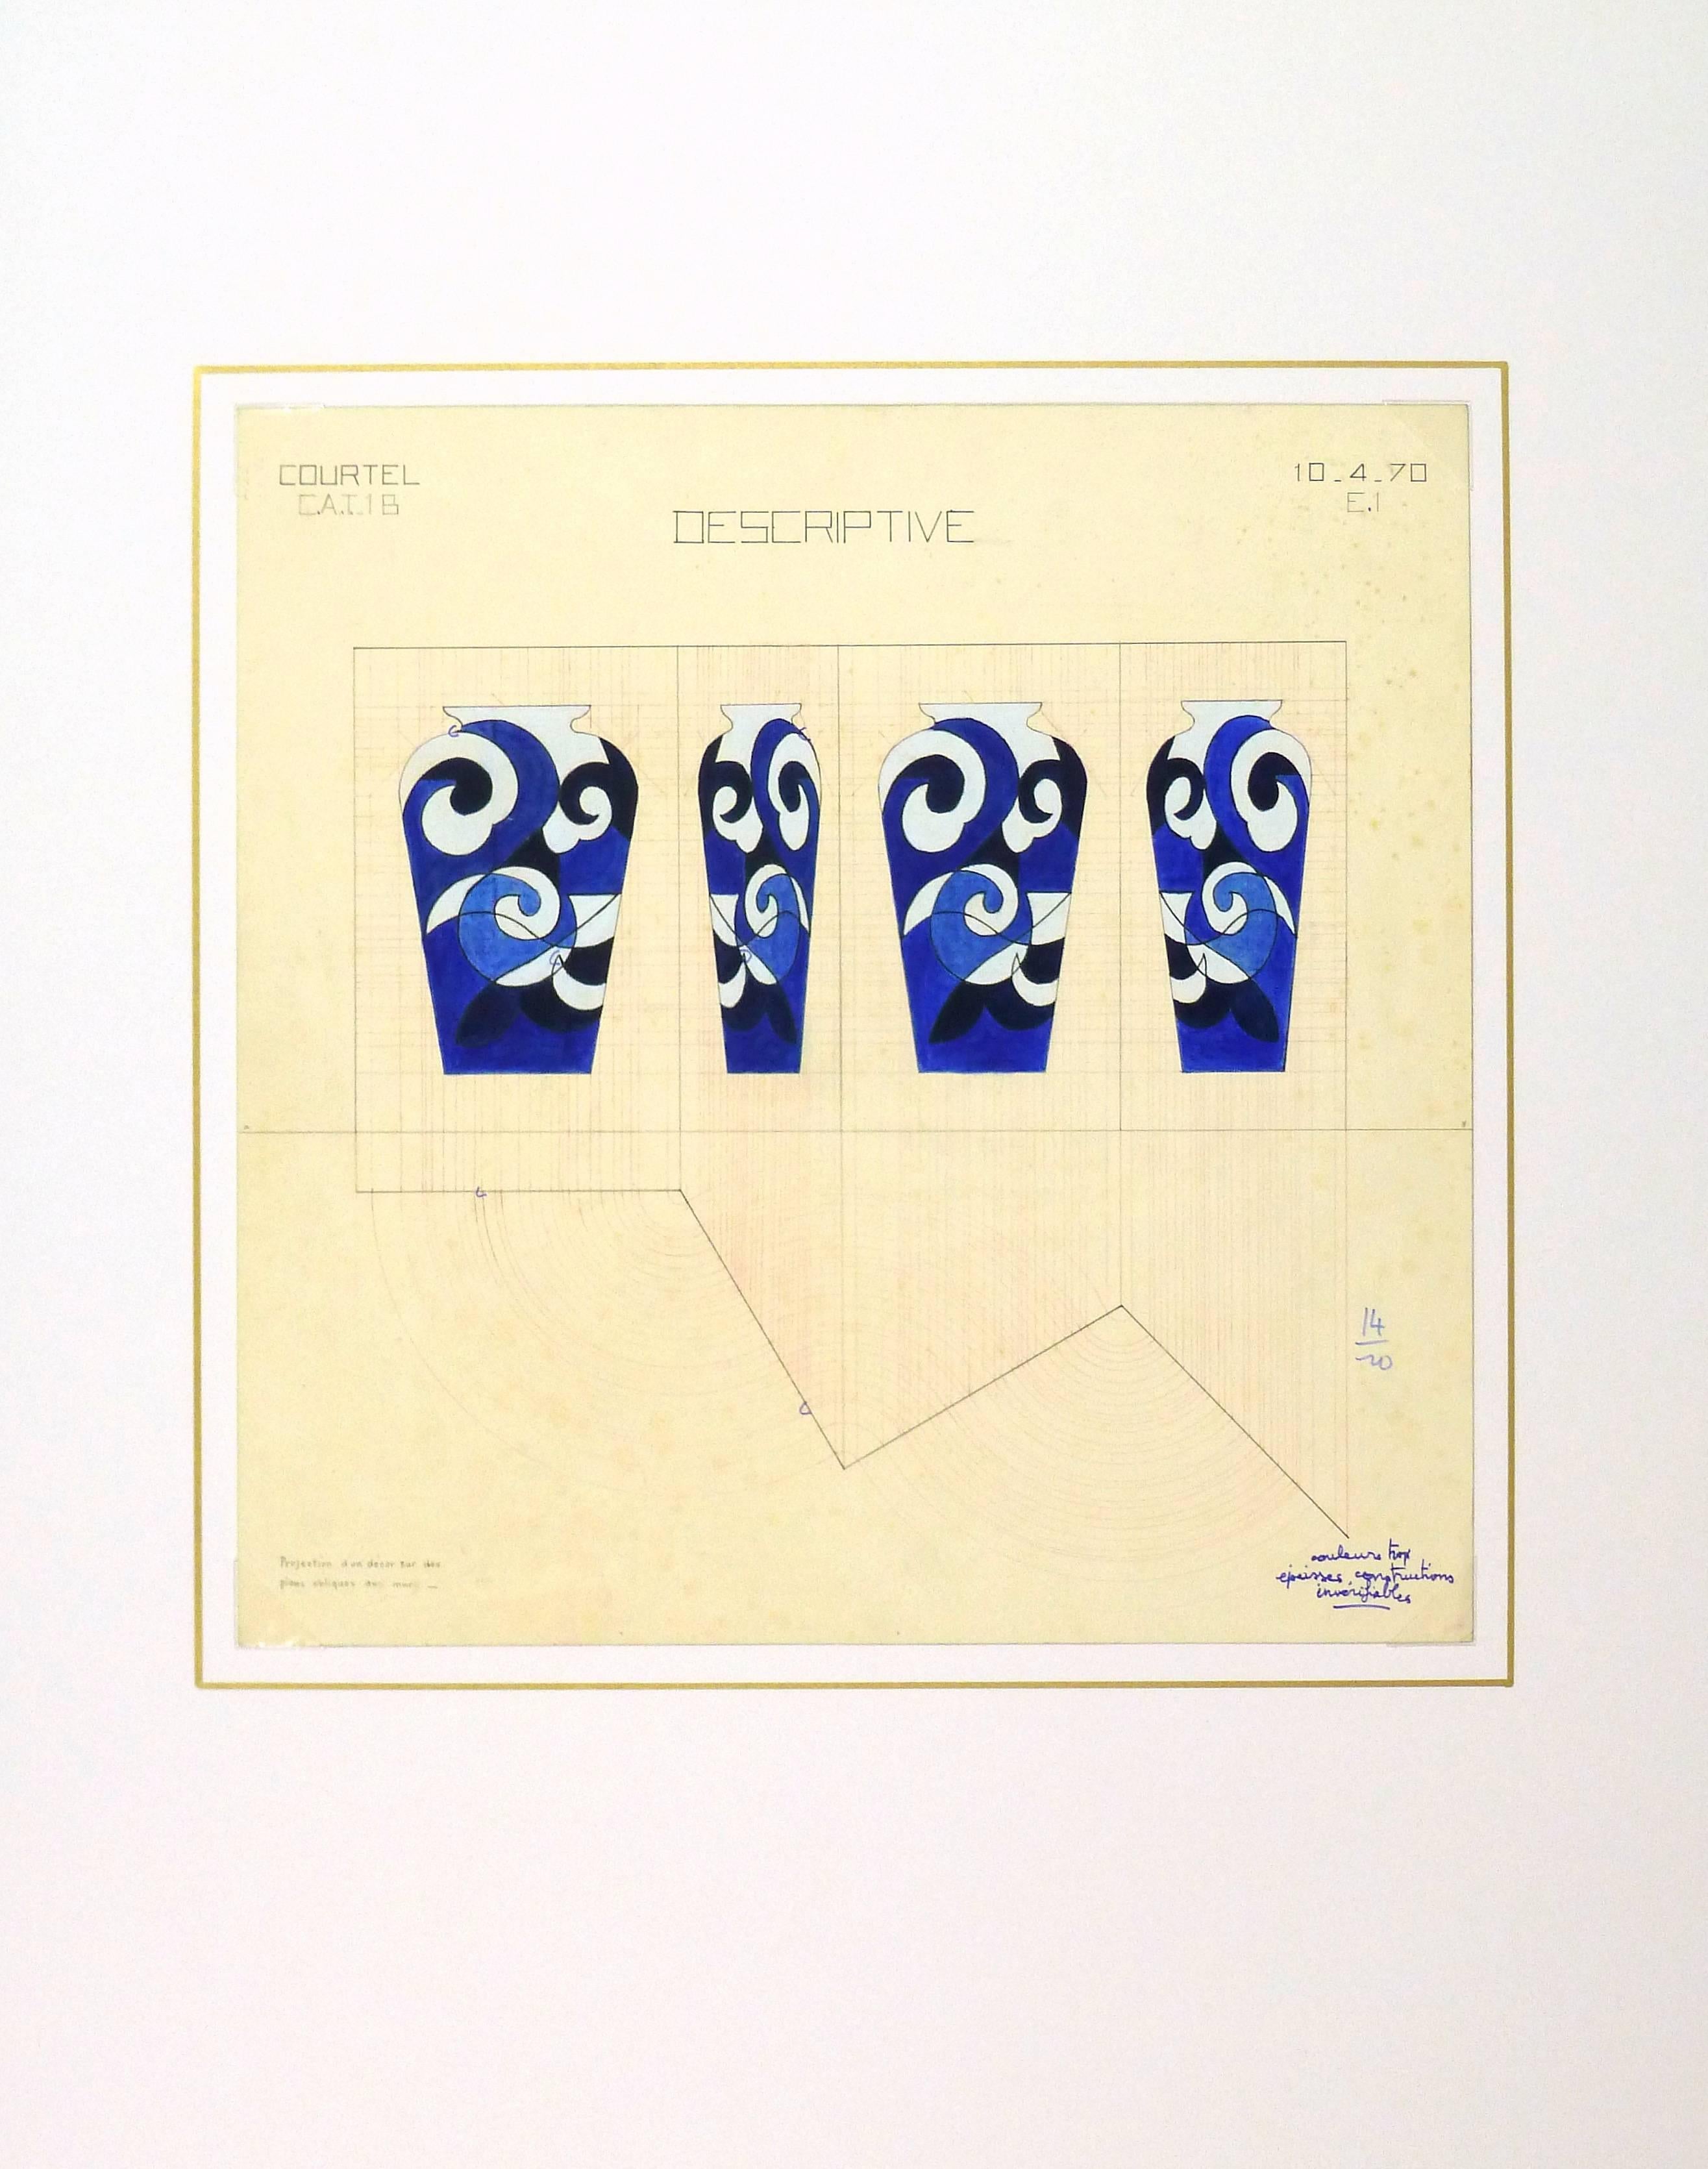 Unique drawing illustrating the details for a decorative blue vase from the School of Decorative Arts of Paris, 1970. 

Original artwork on paper displayed on a white mat with a gold border. Mat fits a standard-size frame. Archival plastic sleeve